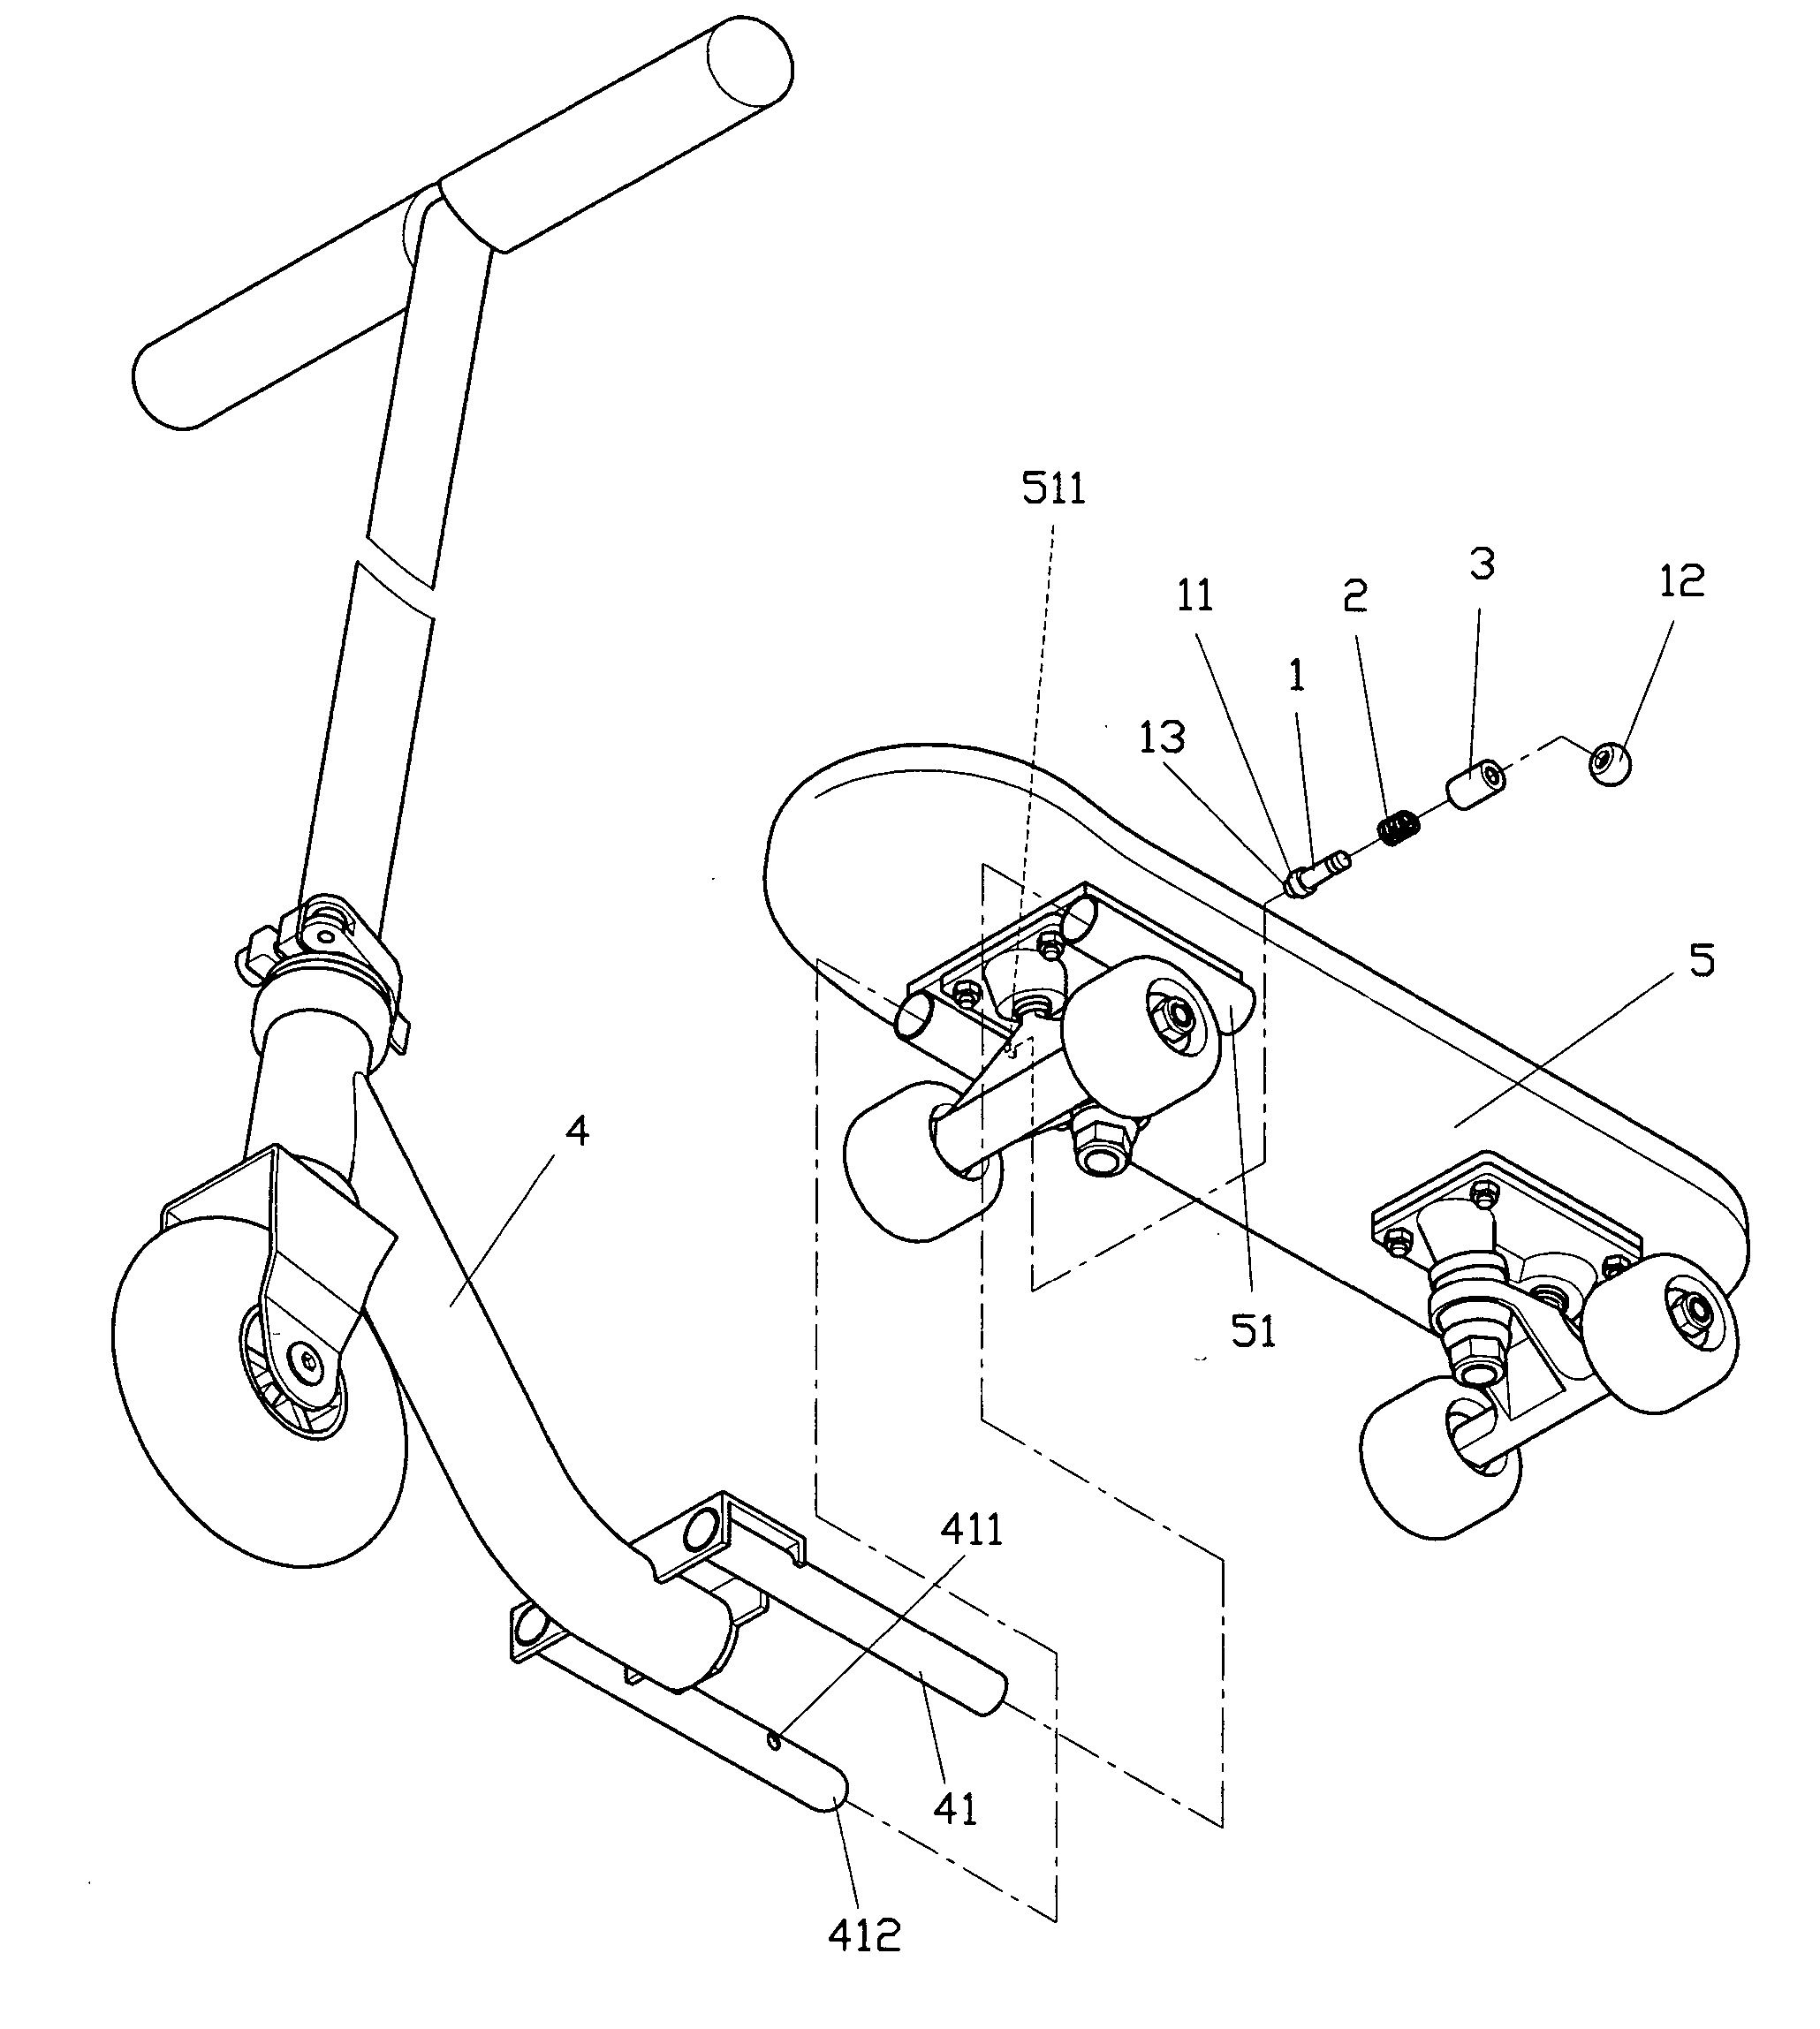 Fastening structure for a scooter